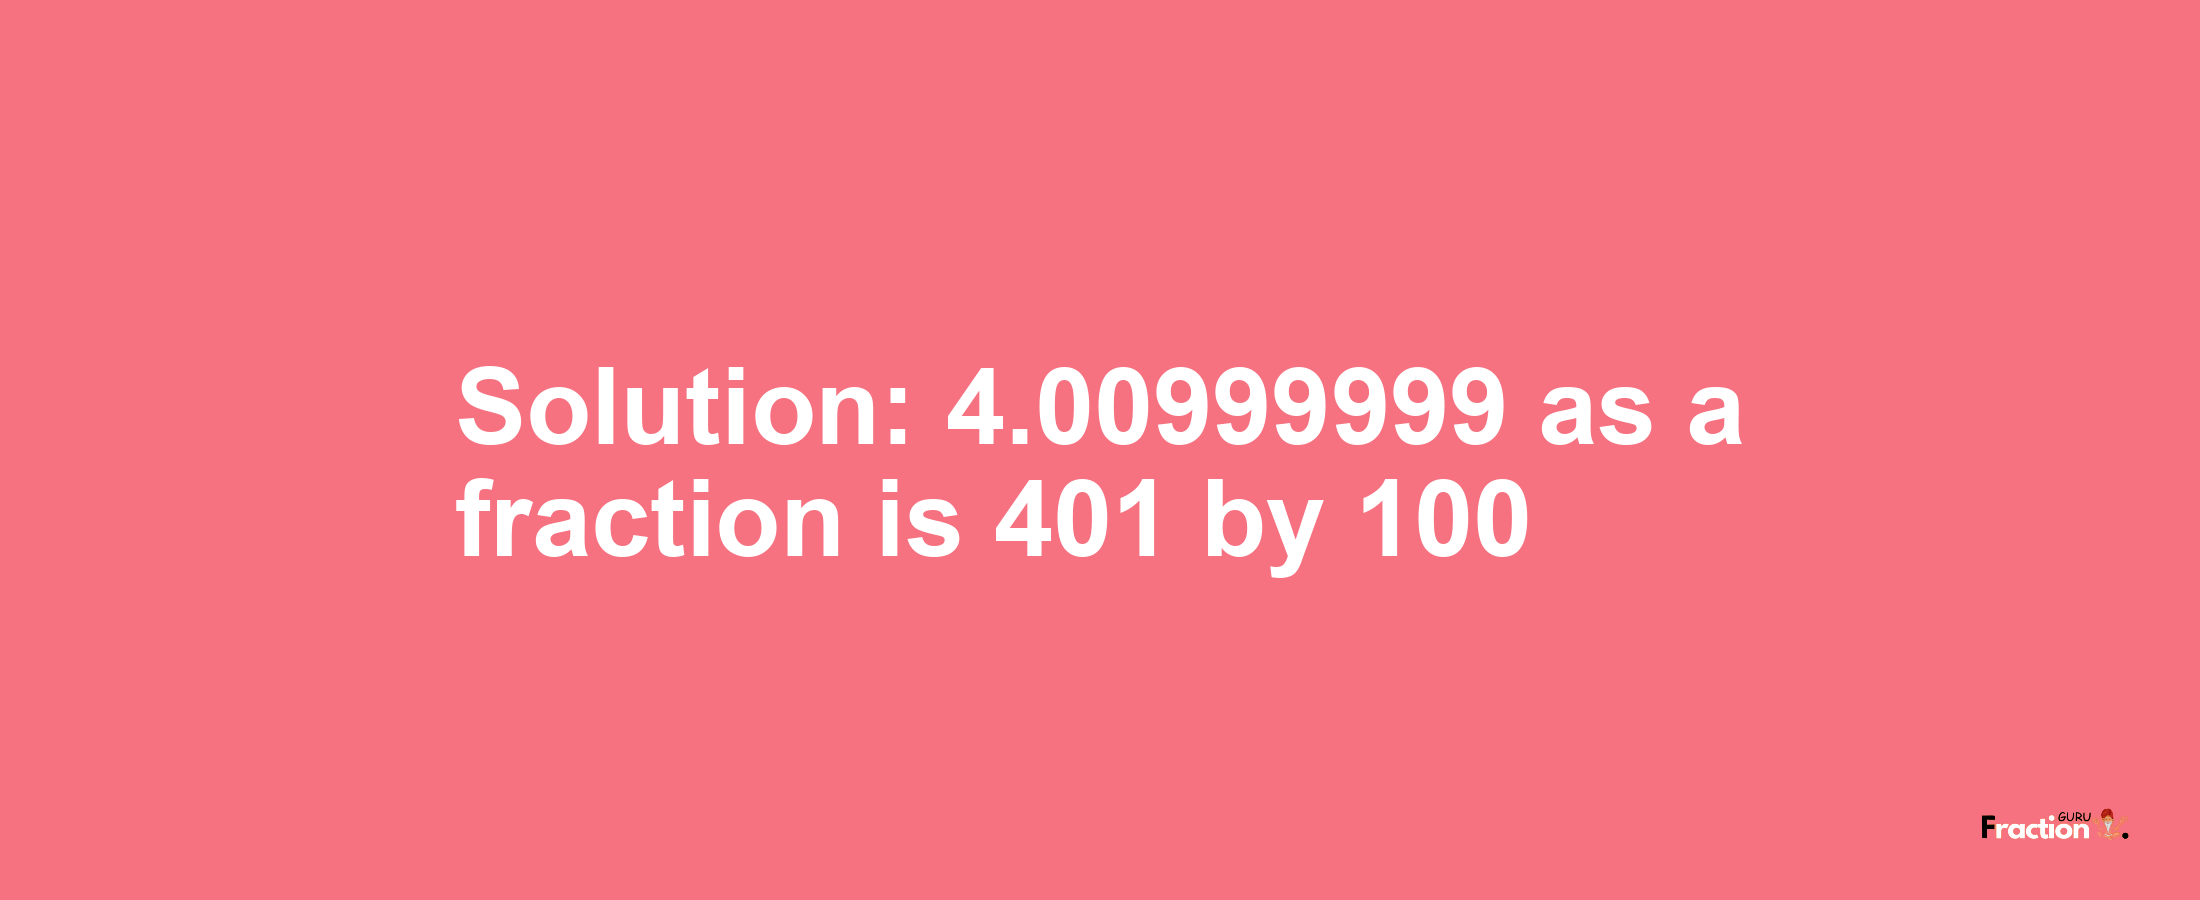 Solution:4.00999999 as a fraction is 401/100